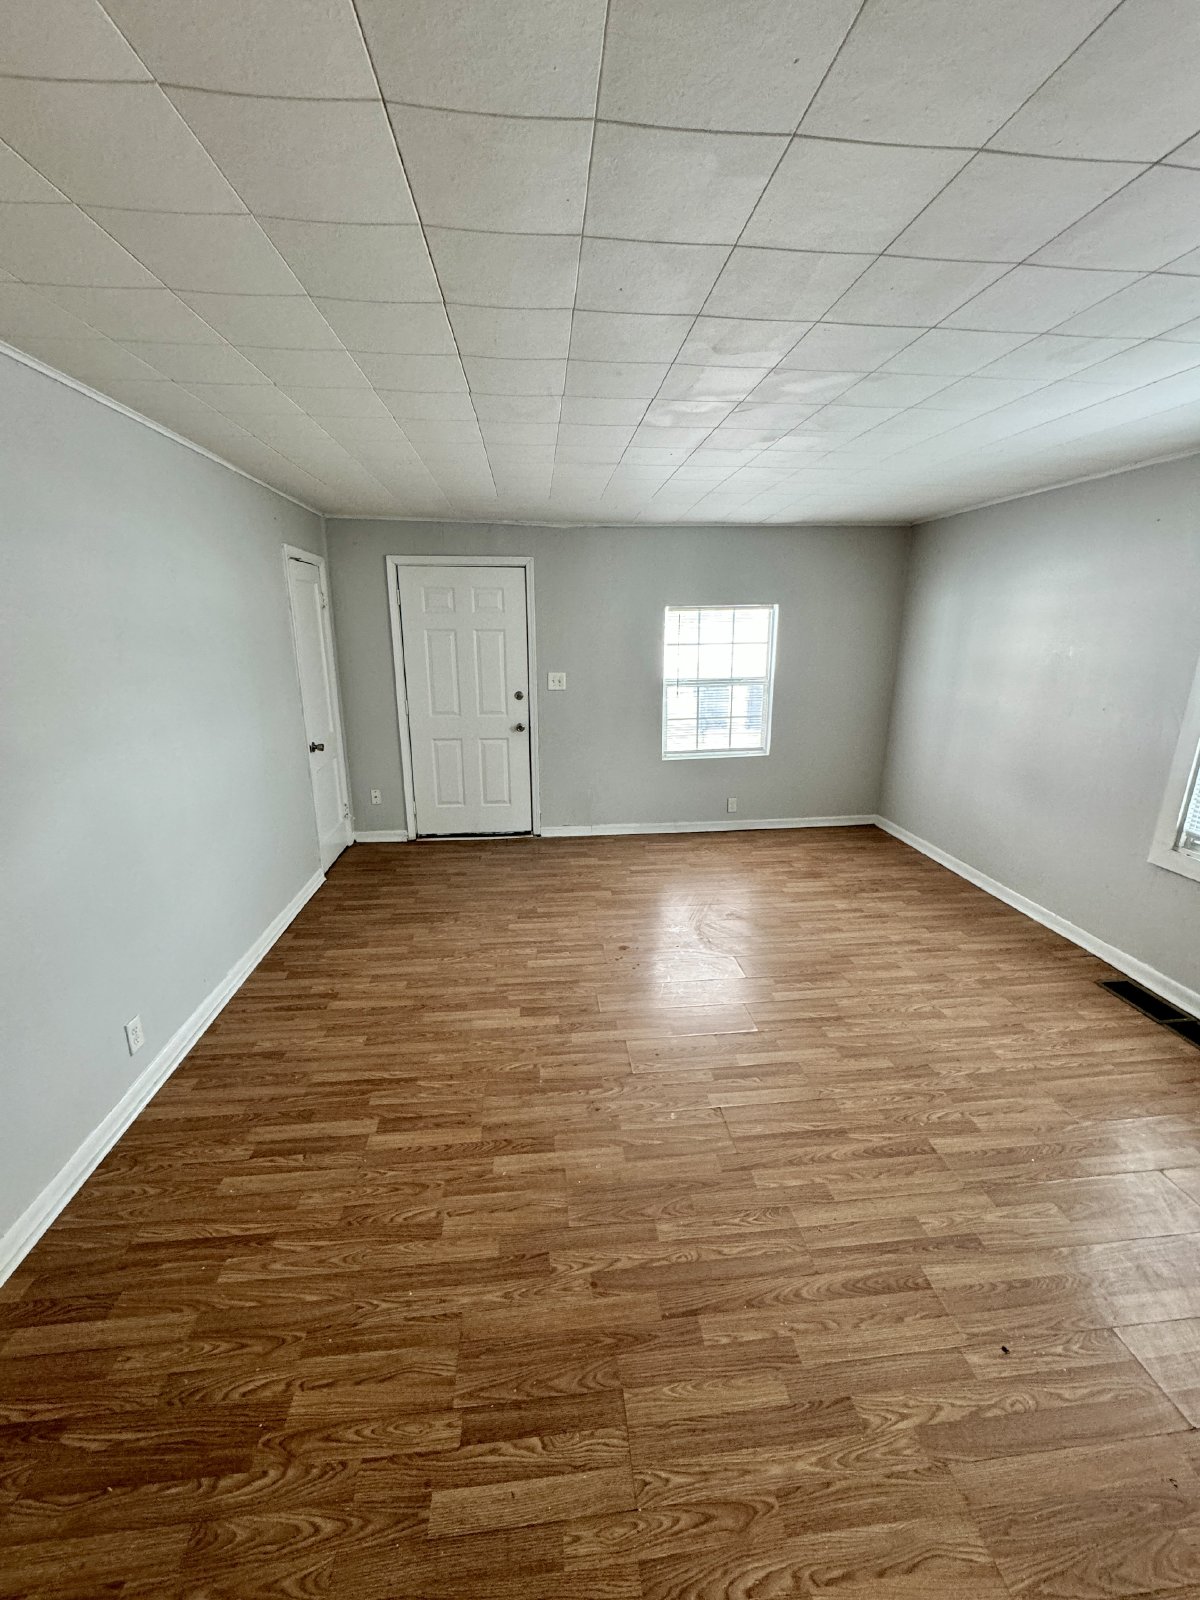 3056 N Euclid-2 bed/1 Bath - Move in ready property image